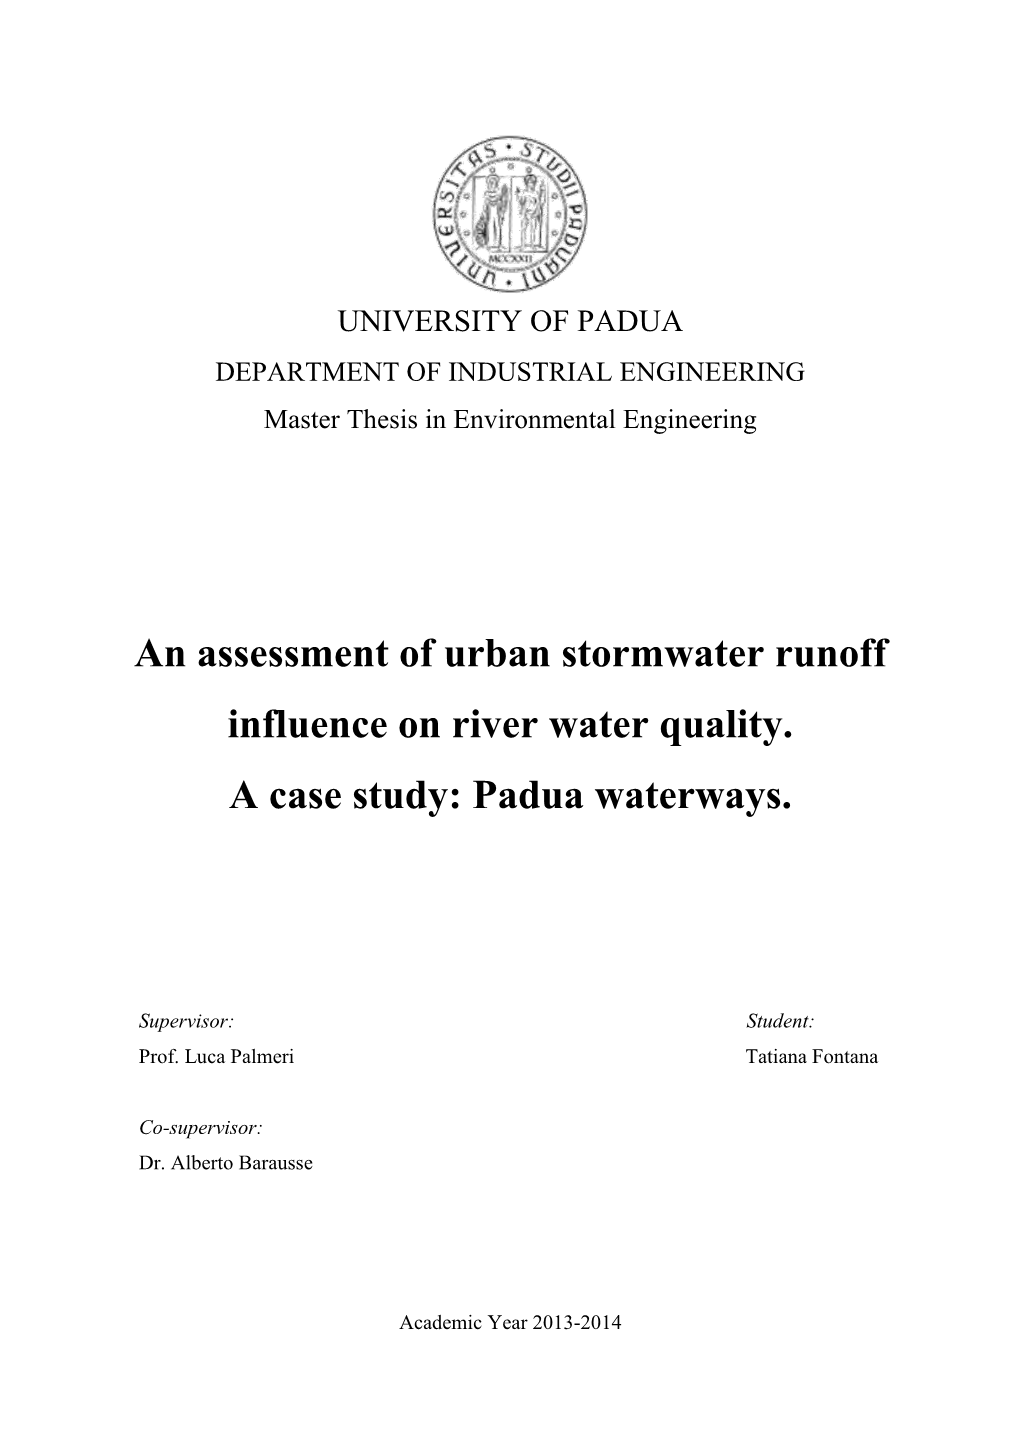 An Assessment of Urban Stormwater Runoff Influence on River Water Quality